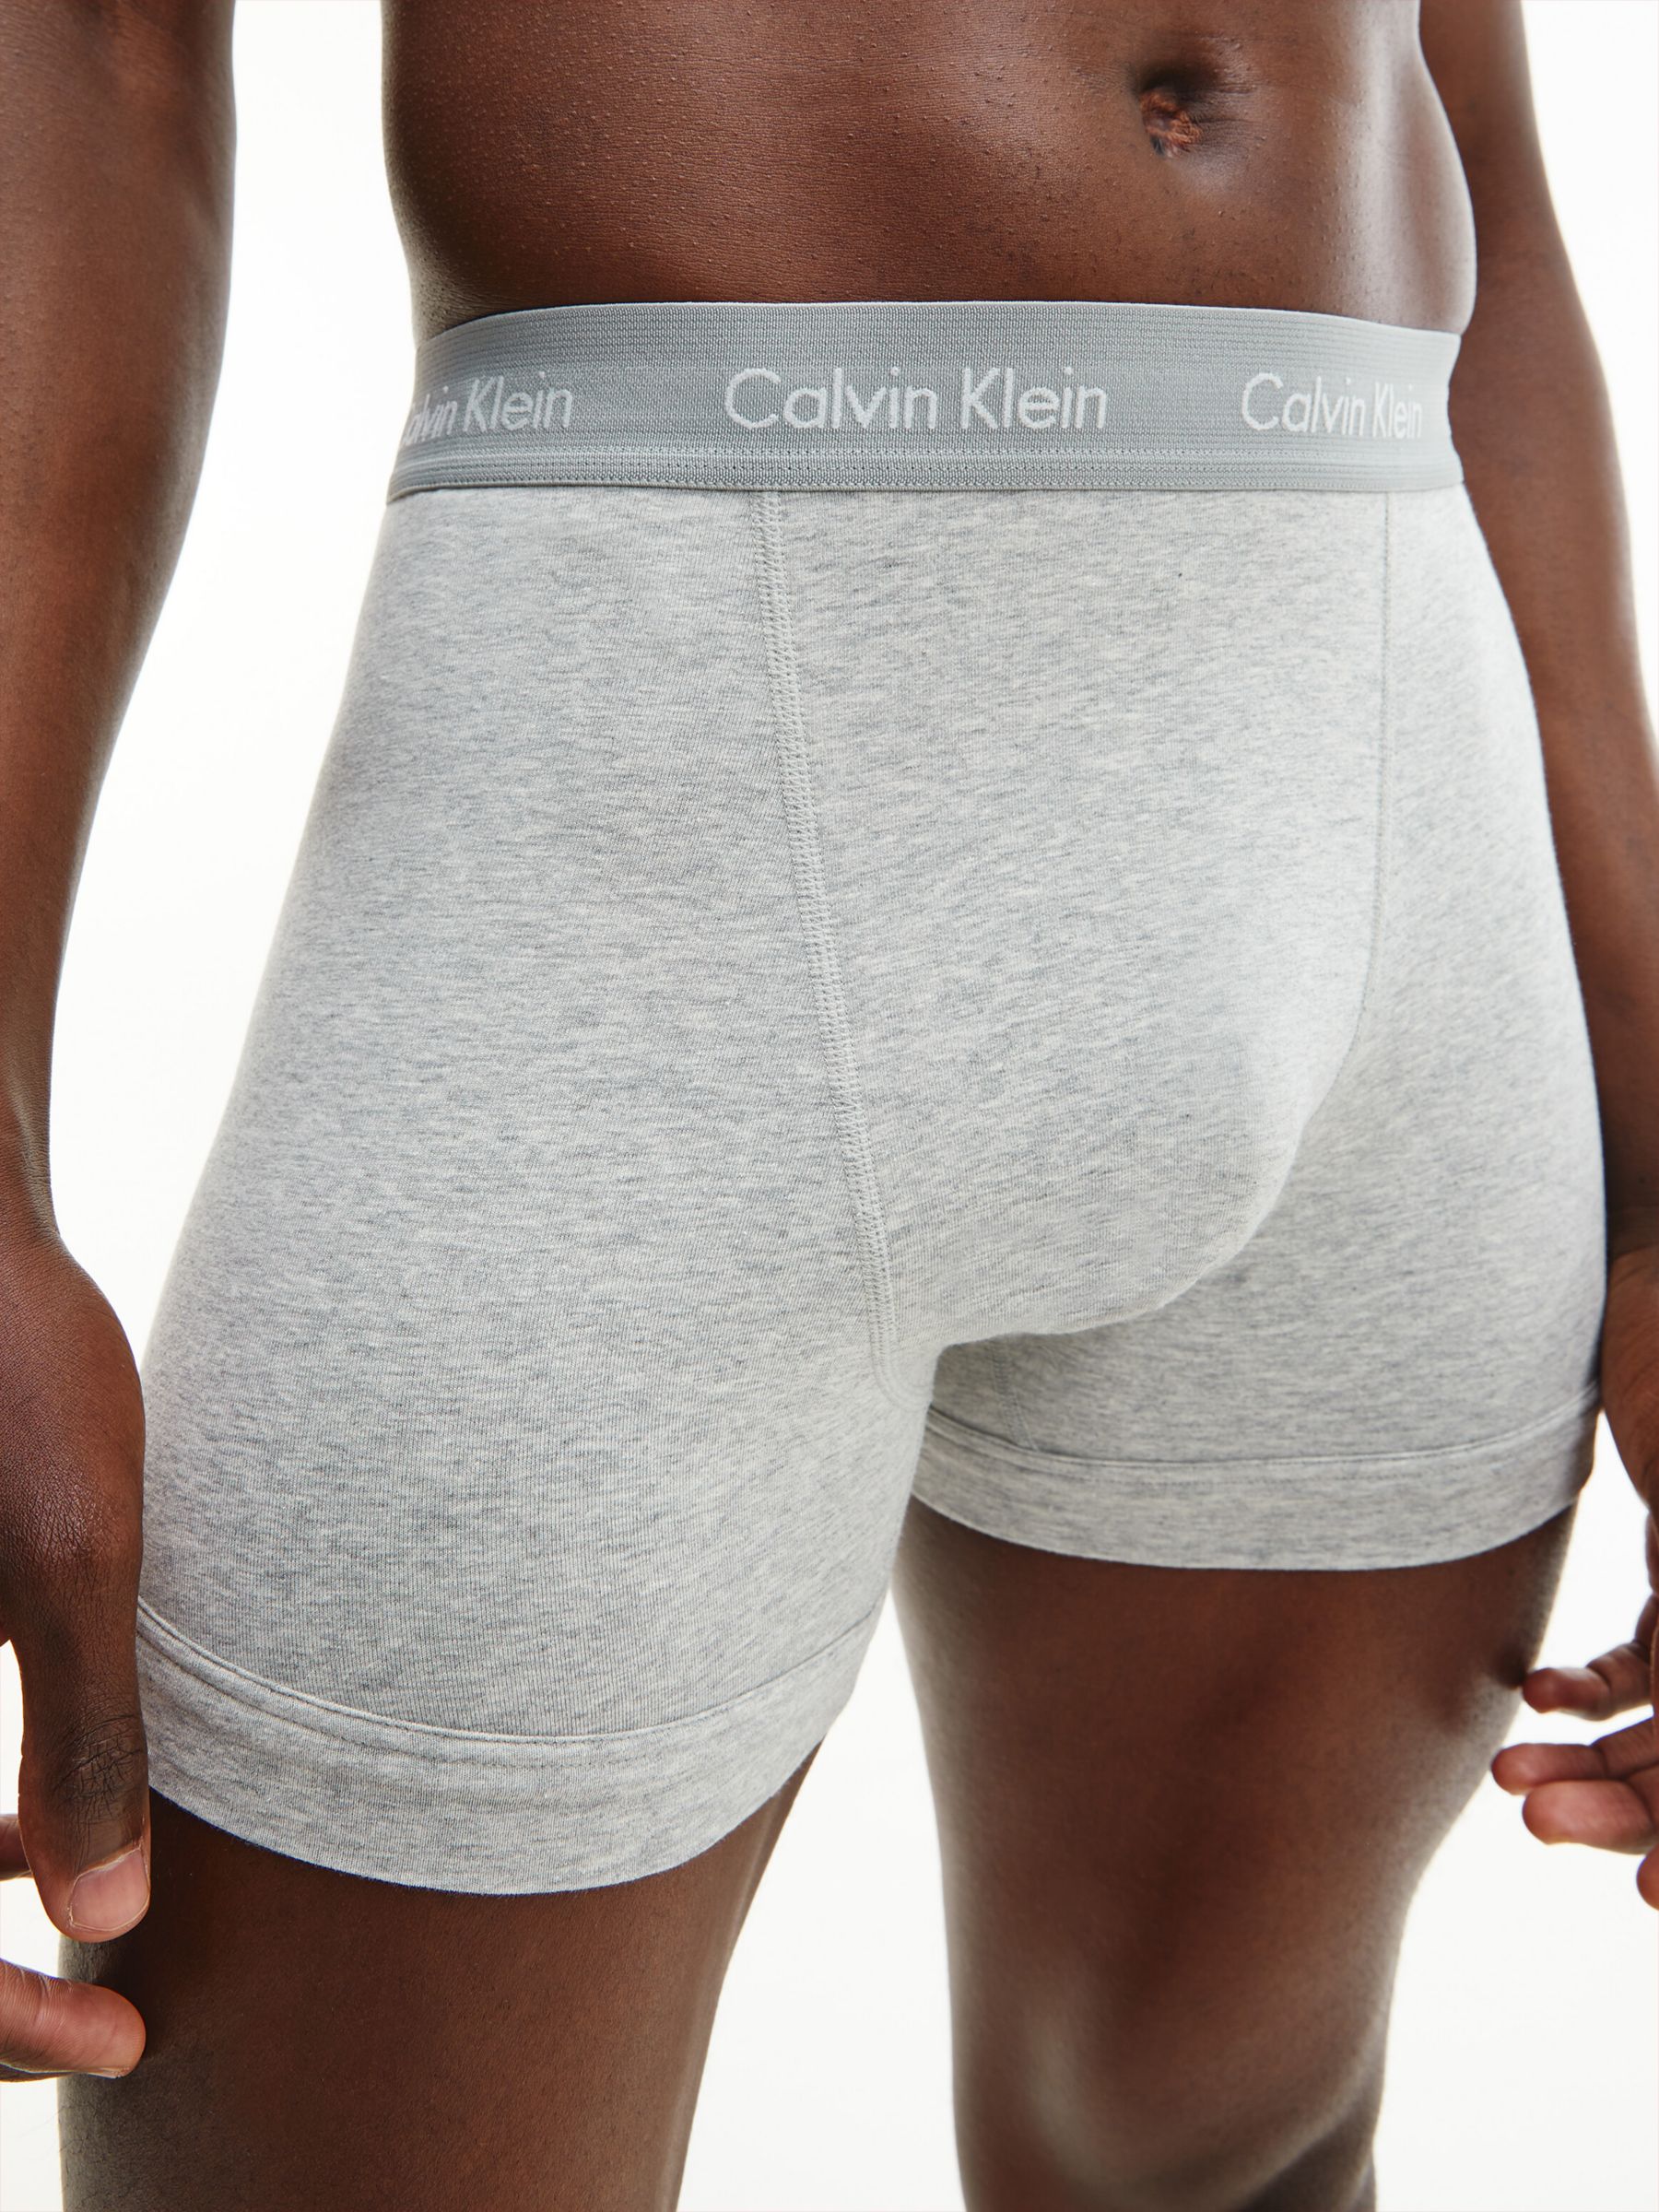 Calvin Klein Logo Embroidered Trunks, Pack of 3, Grey Heather, L